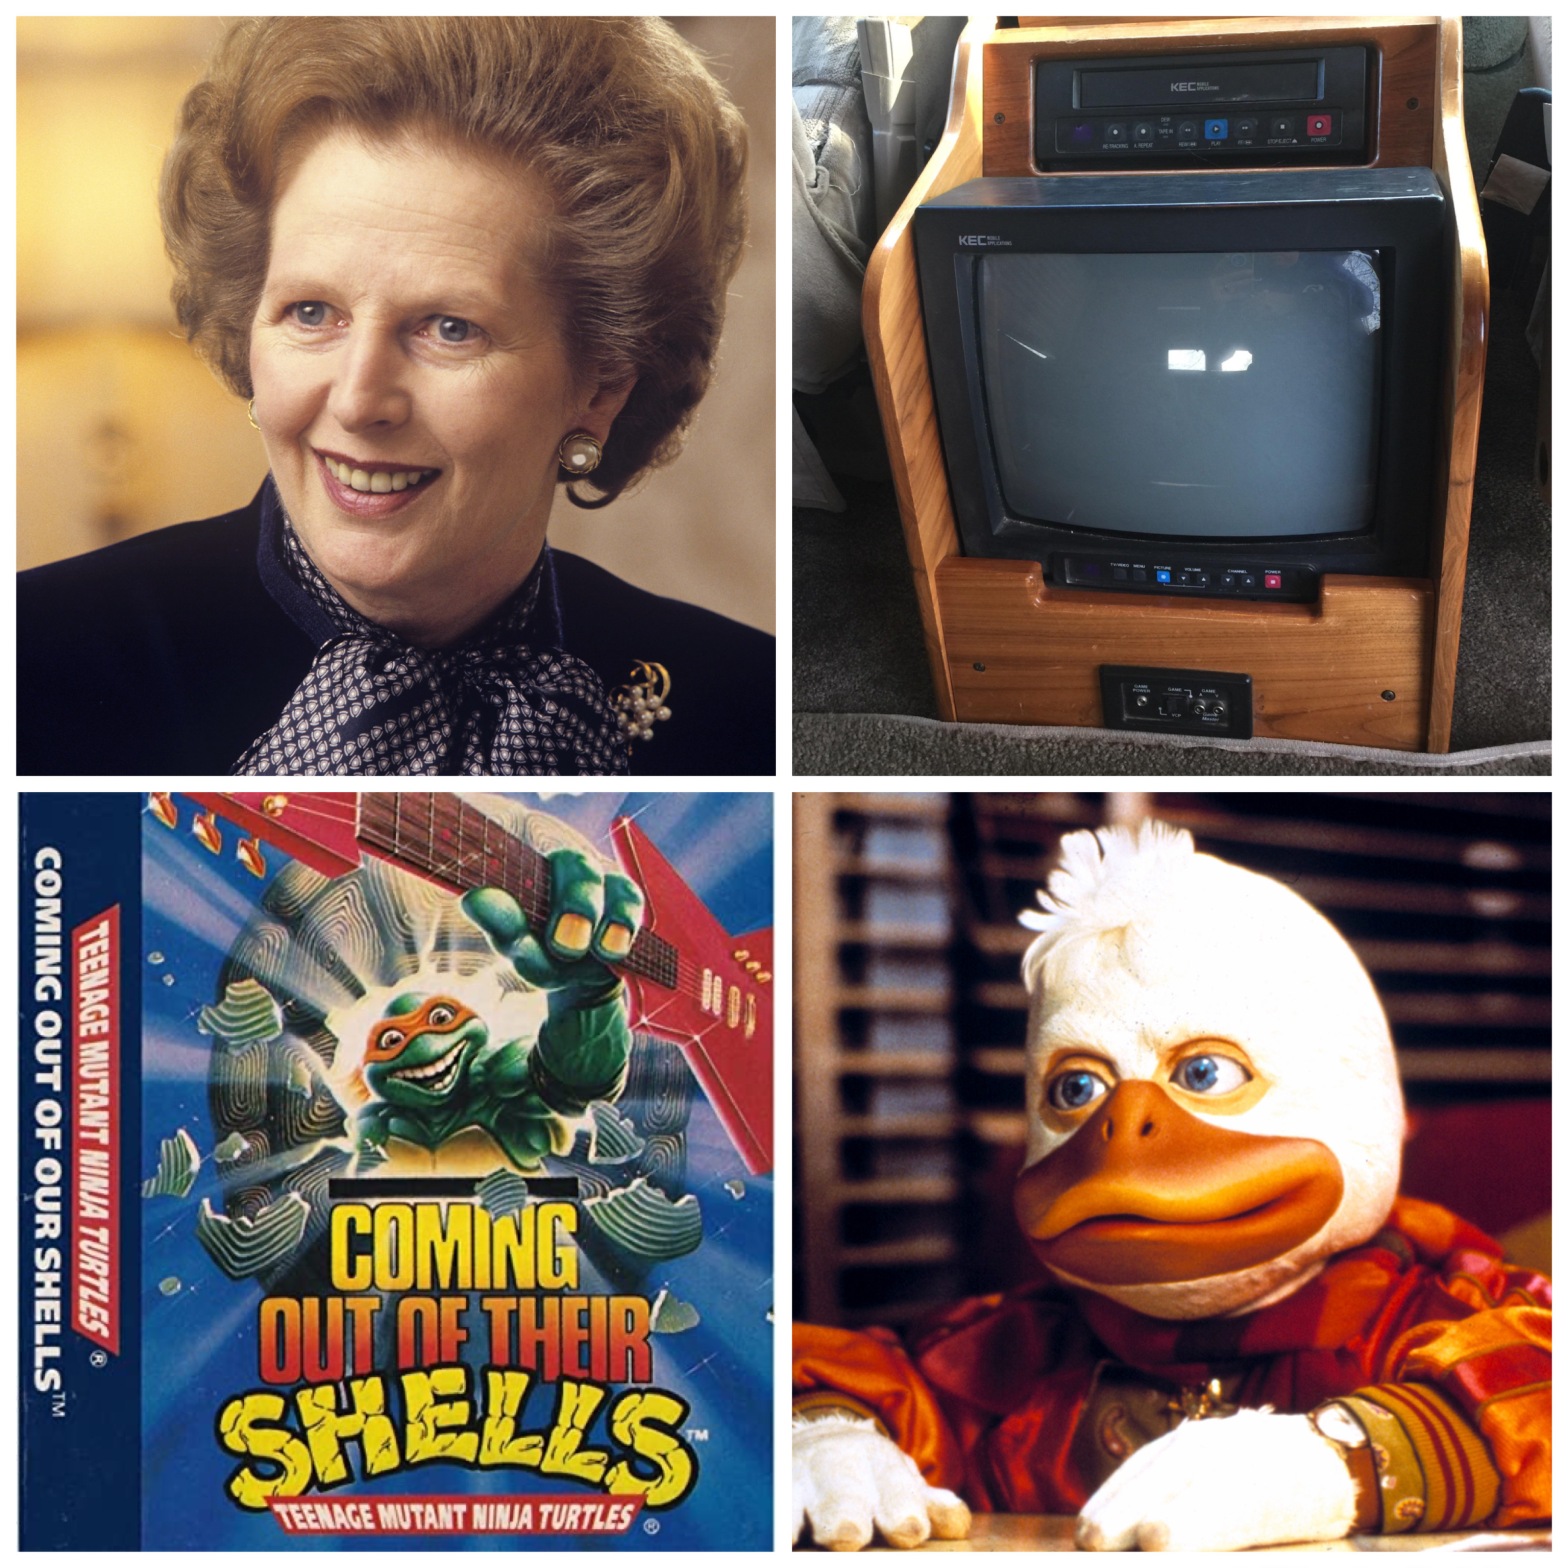 Margaret Thatcher, a Mini Van VHS player, Teenage Mutant Ninja Turtles Coming Out Of Their Shells, Howard The Duck.